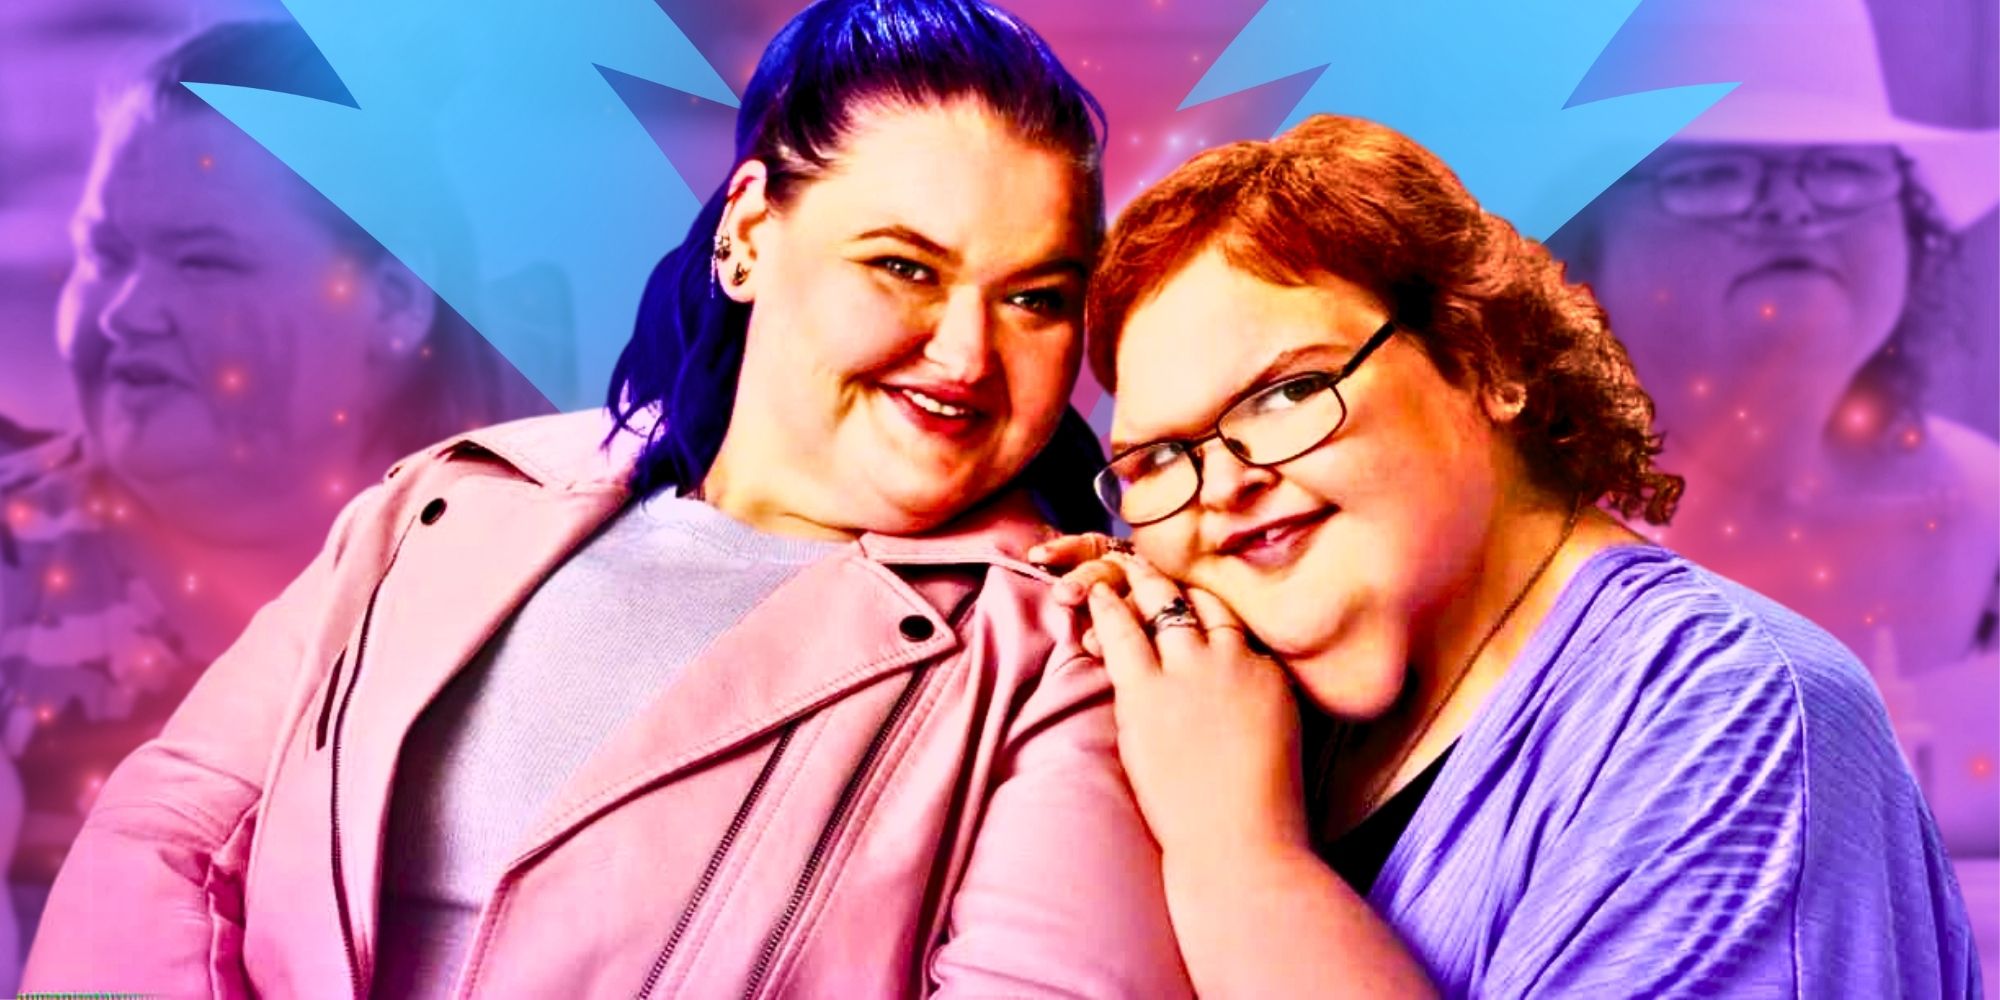 1000-Lb Sisters' Amy & Tammy Slaton leaning on each other